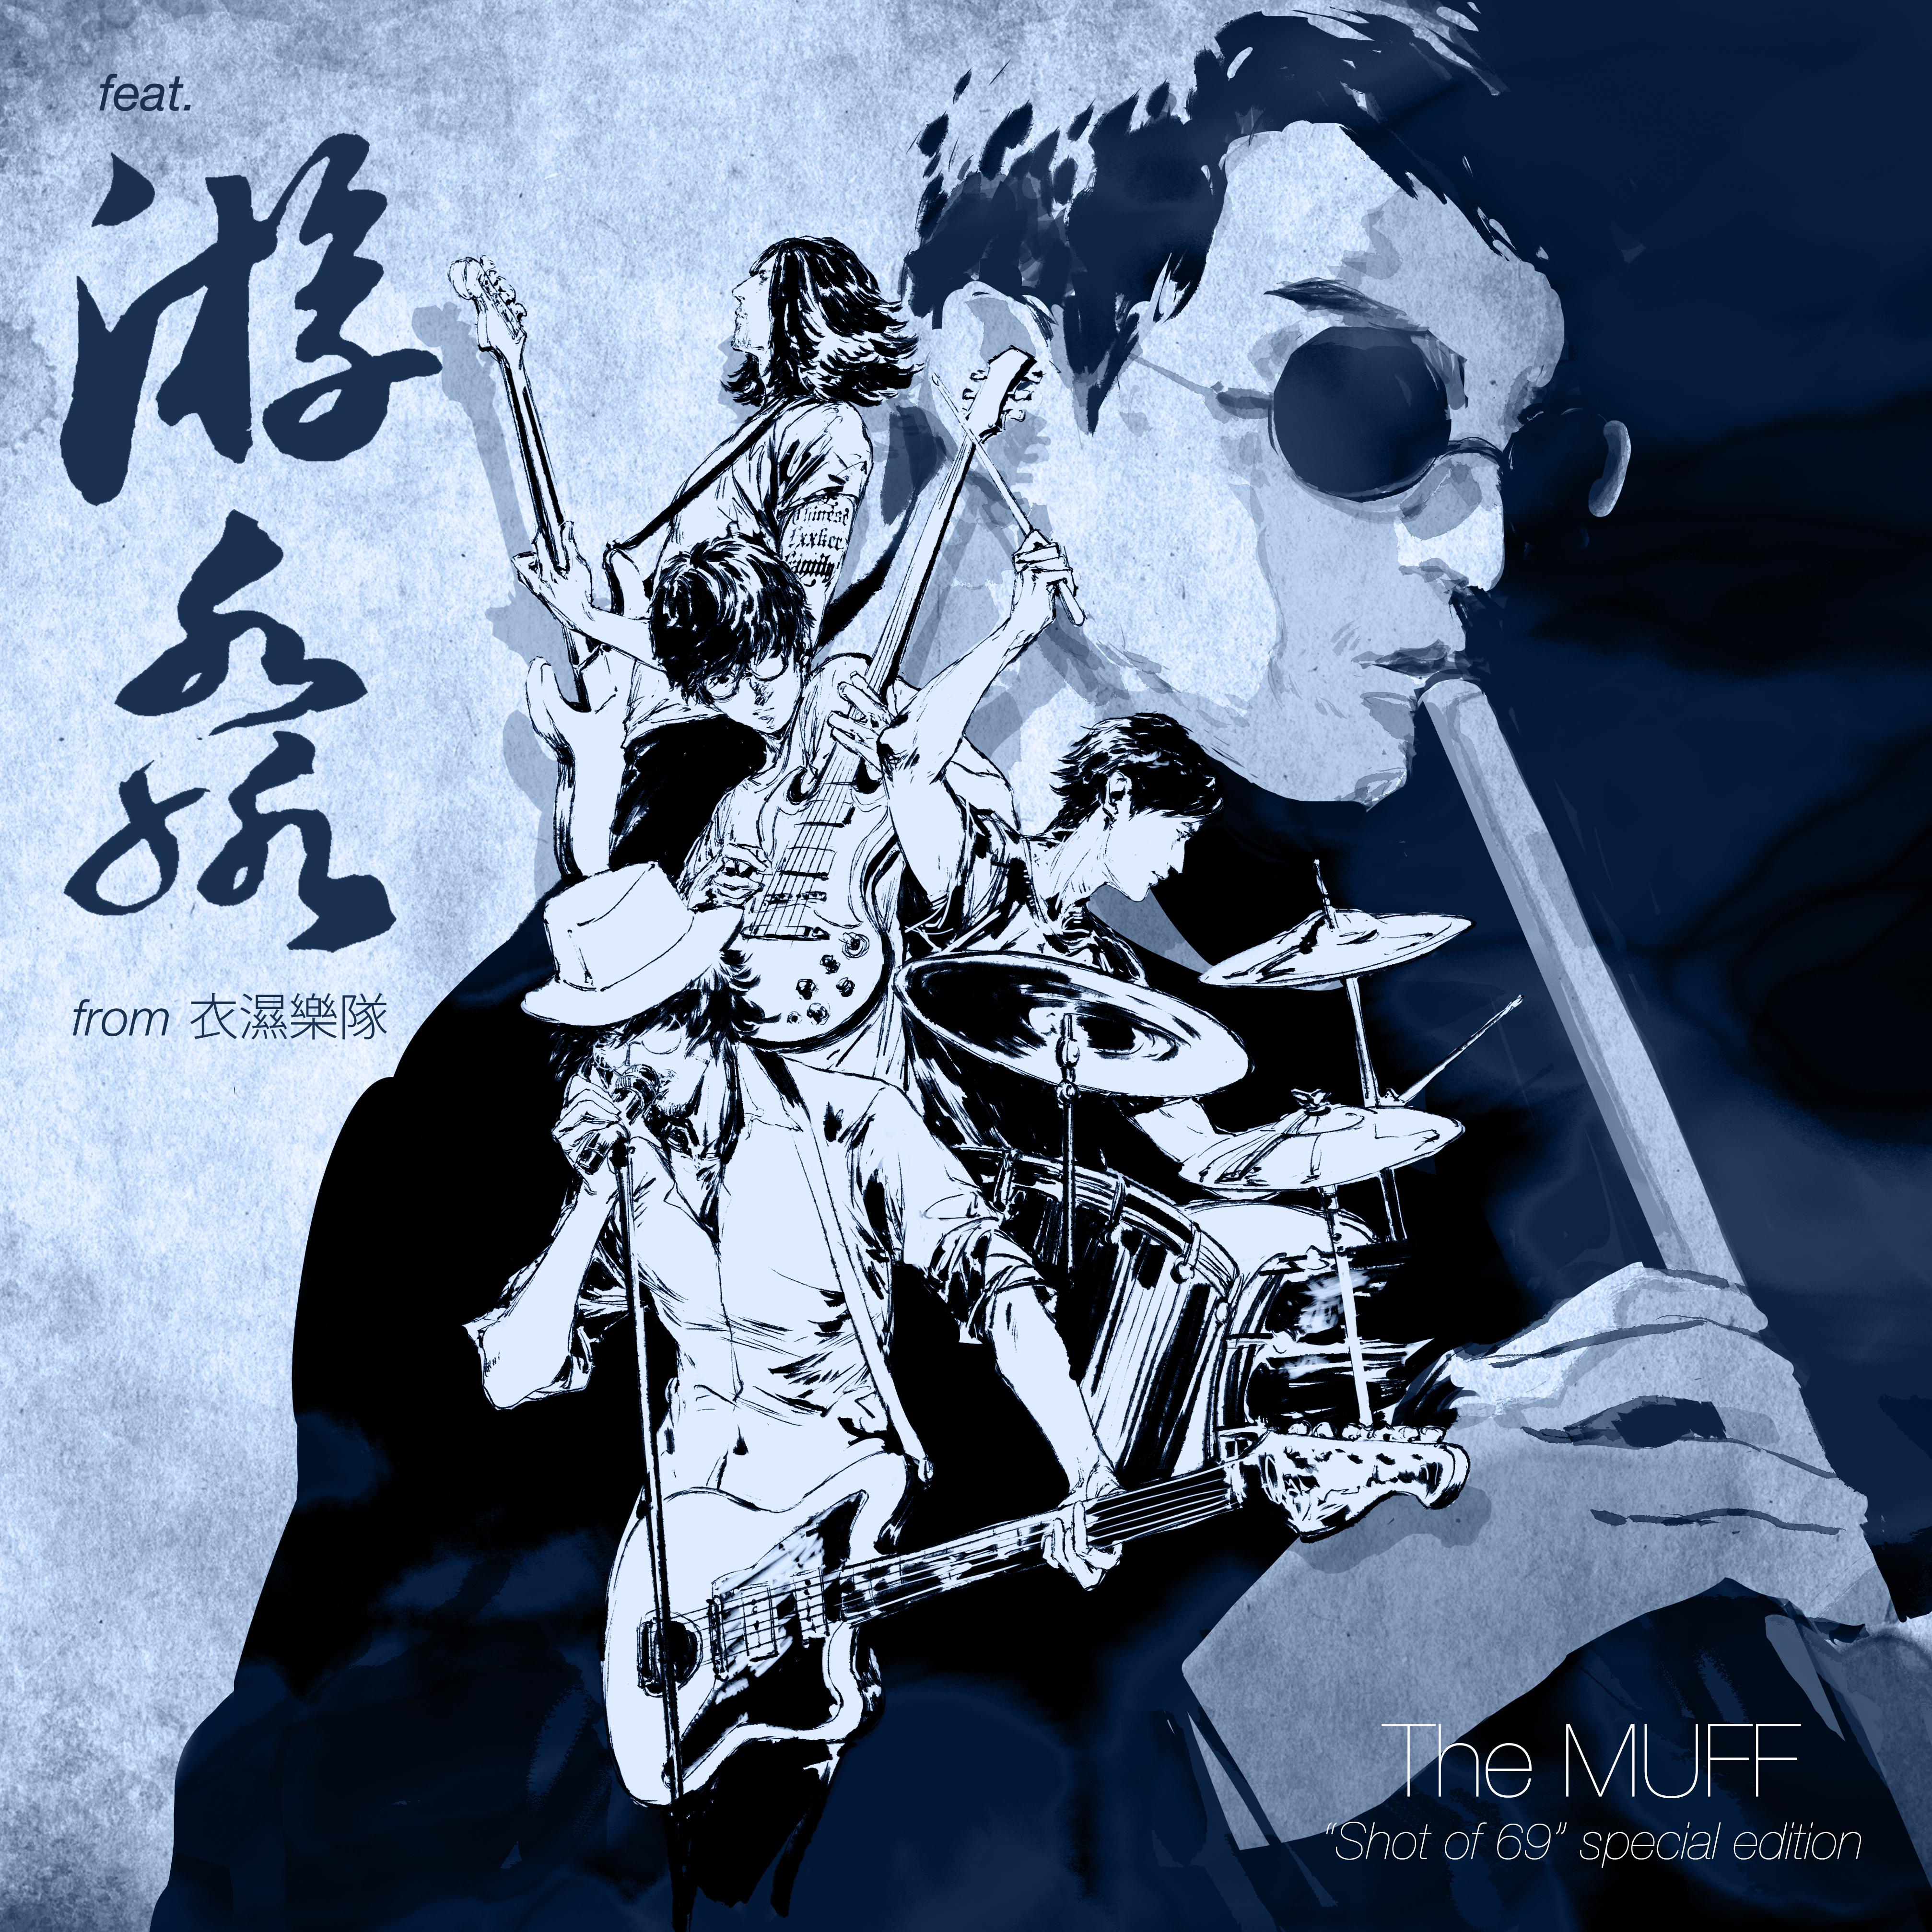 Shot of 69 special edition（feat.衣湿）专辑